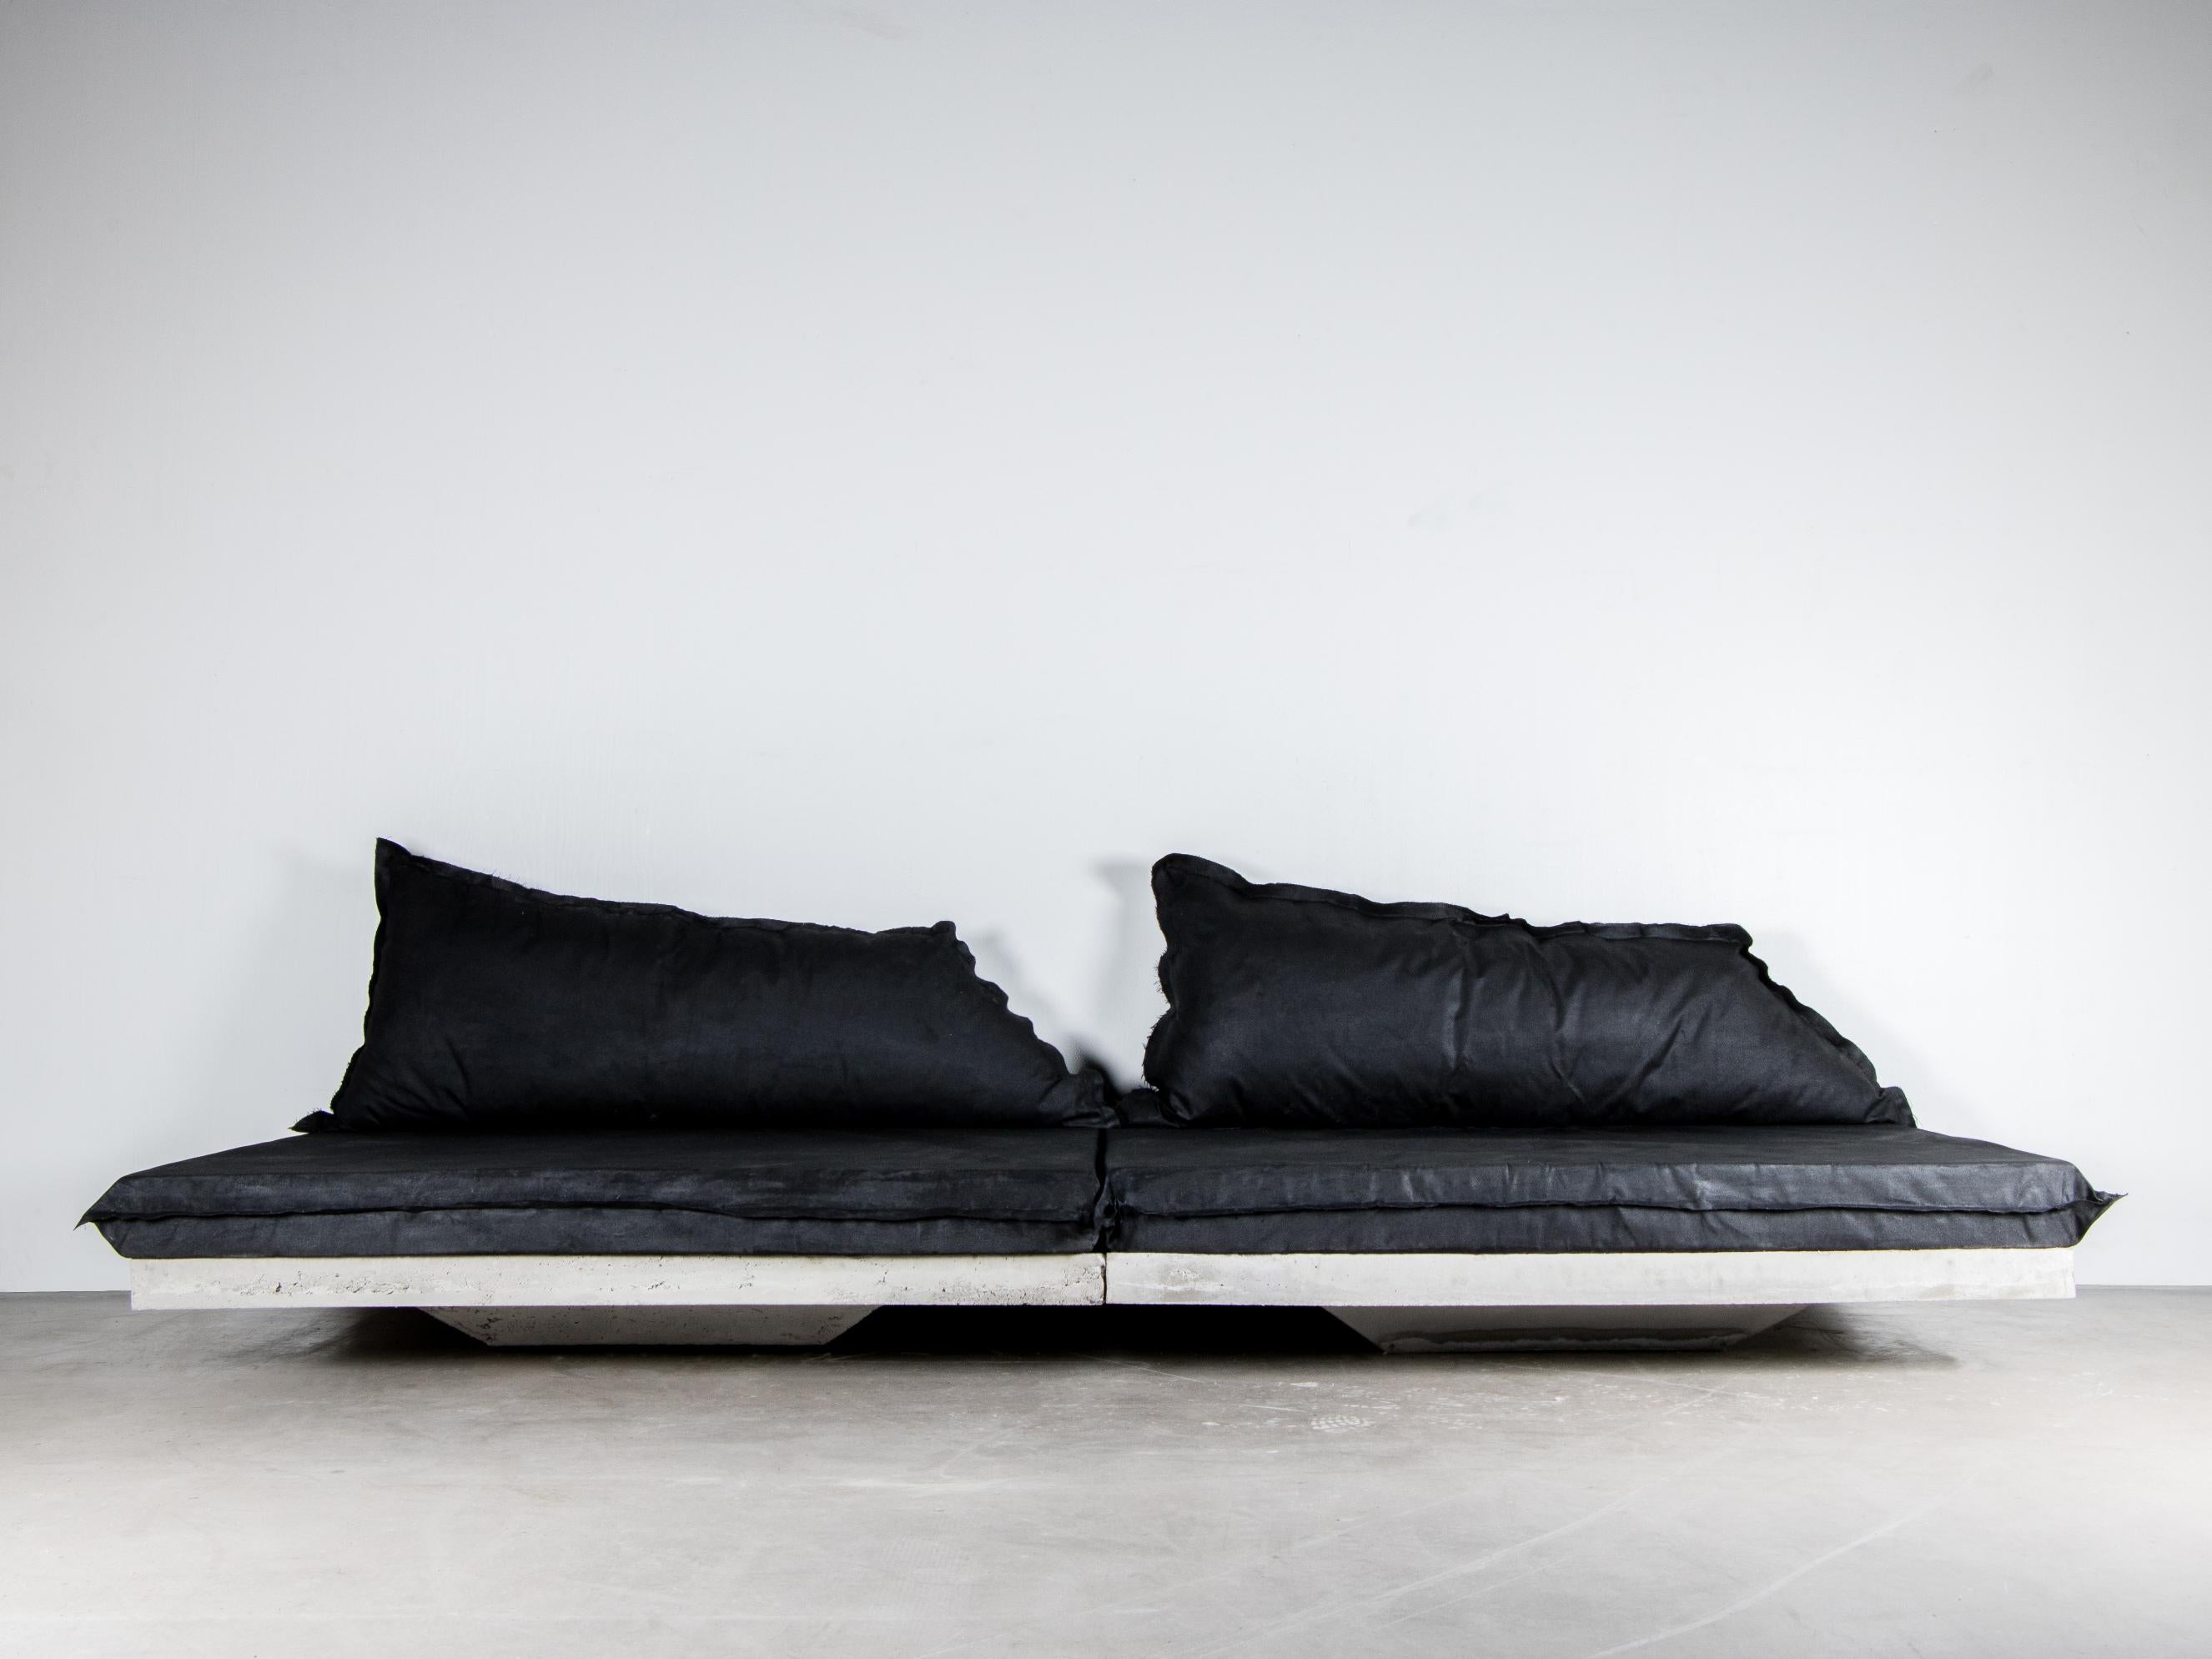 Svav sofa by Lucas Tyra Morten
2020
Limited edition of 19
Price per module
Module dimensions: H 32, D 110, W 140 cm
Module weight: 100 kg.
Material: concrete and hand-waxed upholstered cushion.


A floating concrete raft - an illusion or an